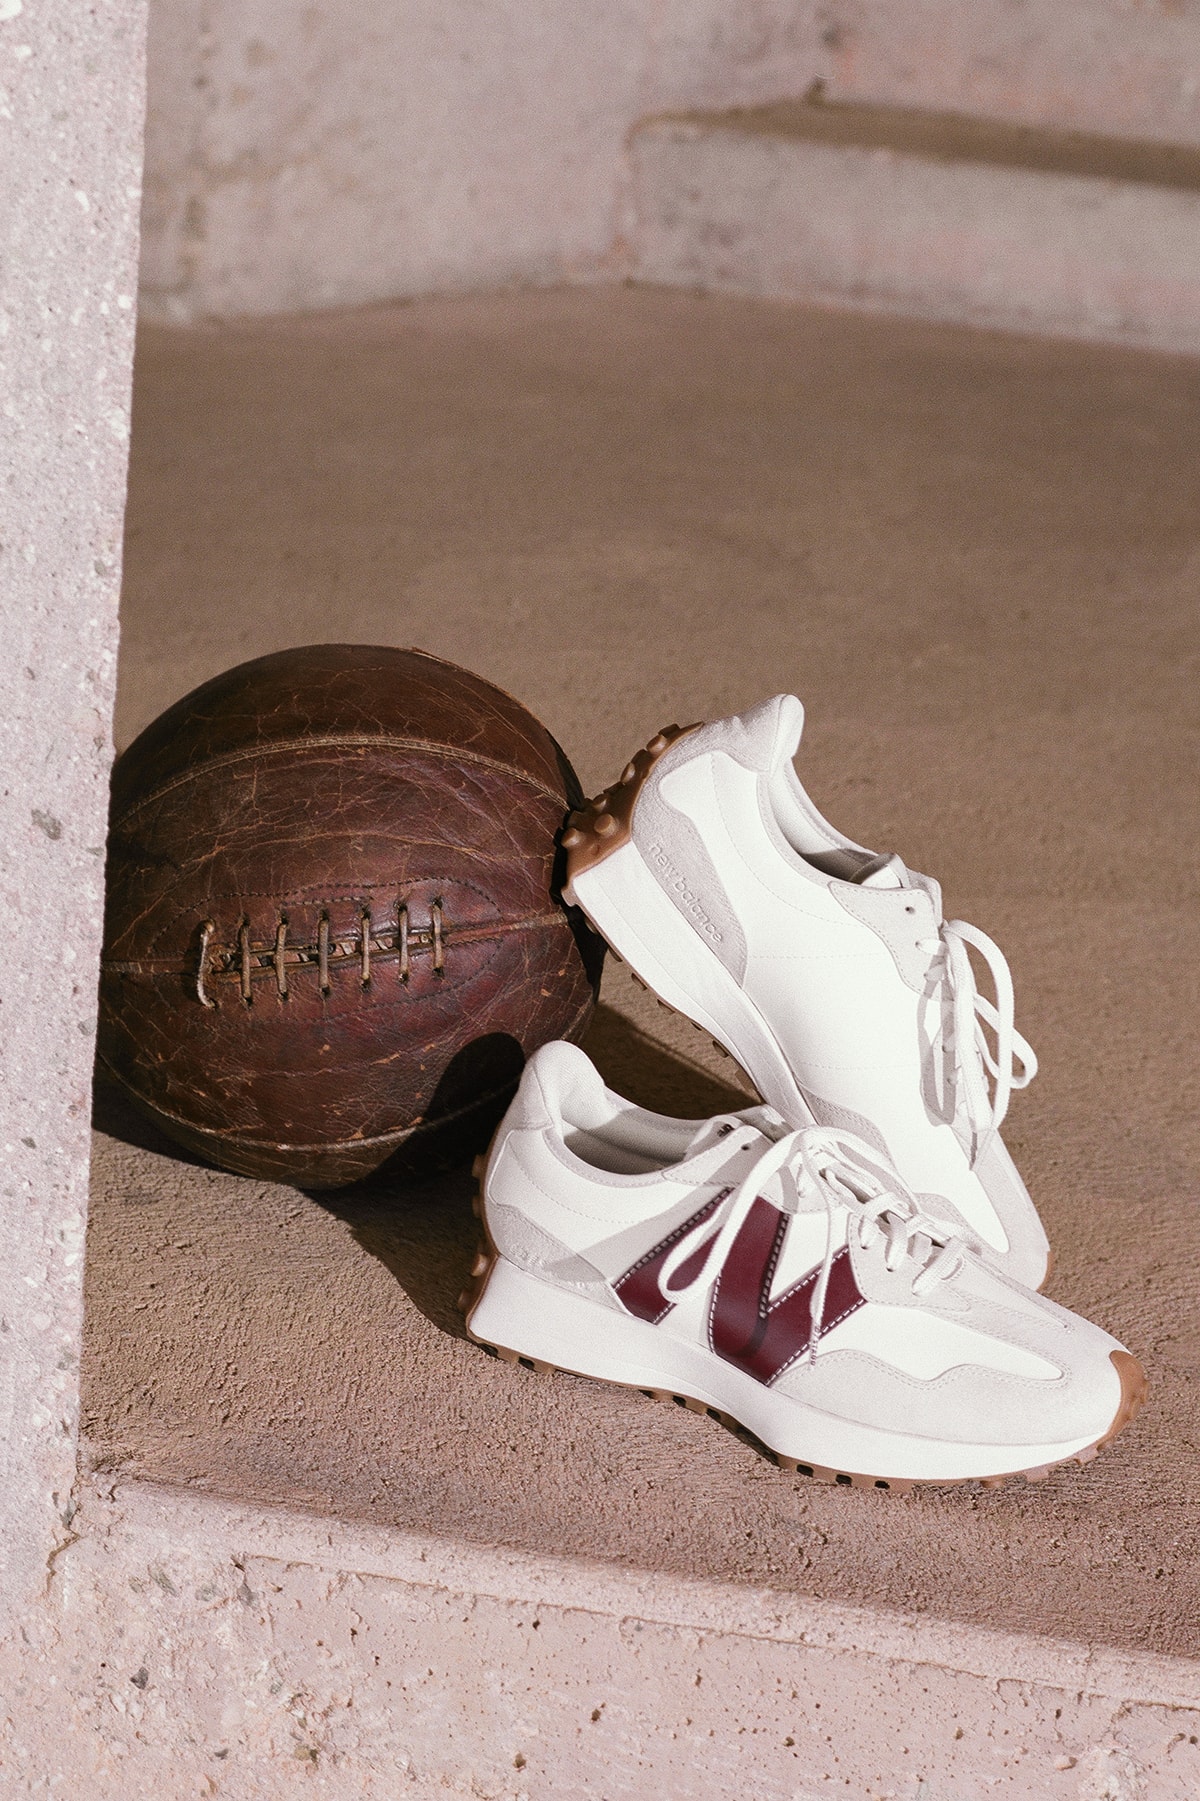 STAUD x New Balance Activewear Collaboration Collection 327 Sneaker